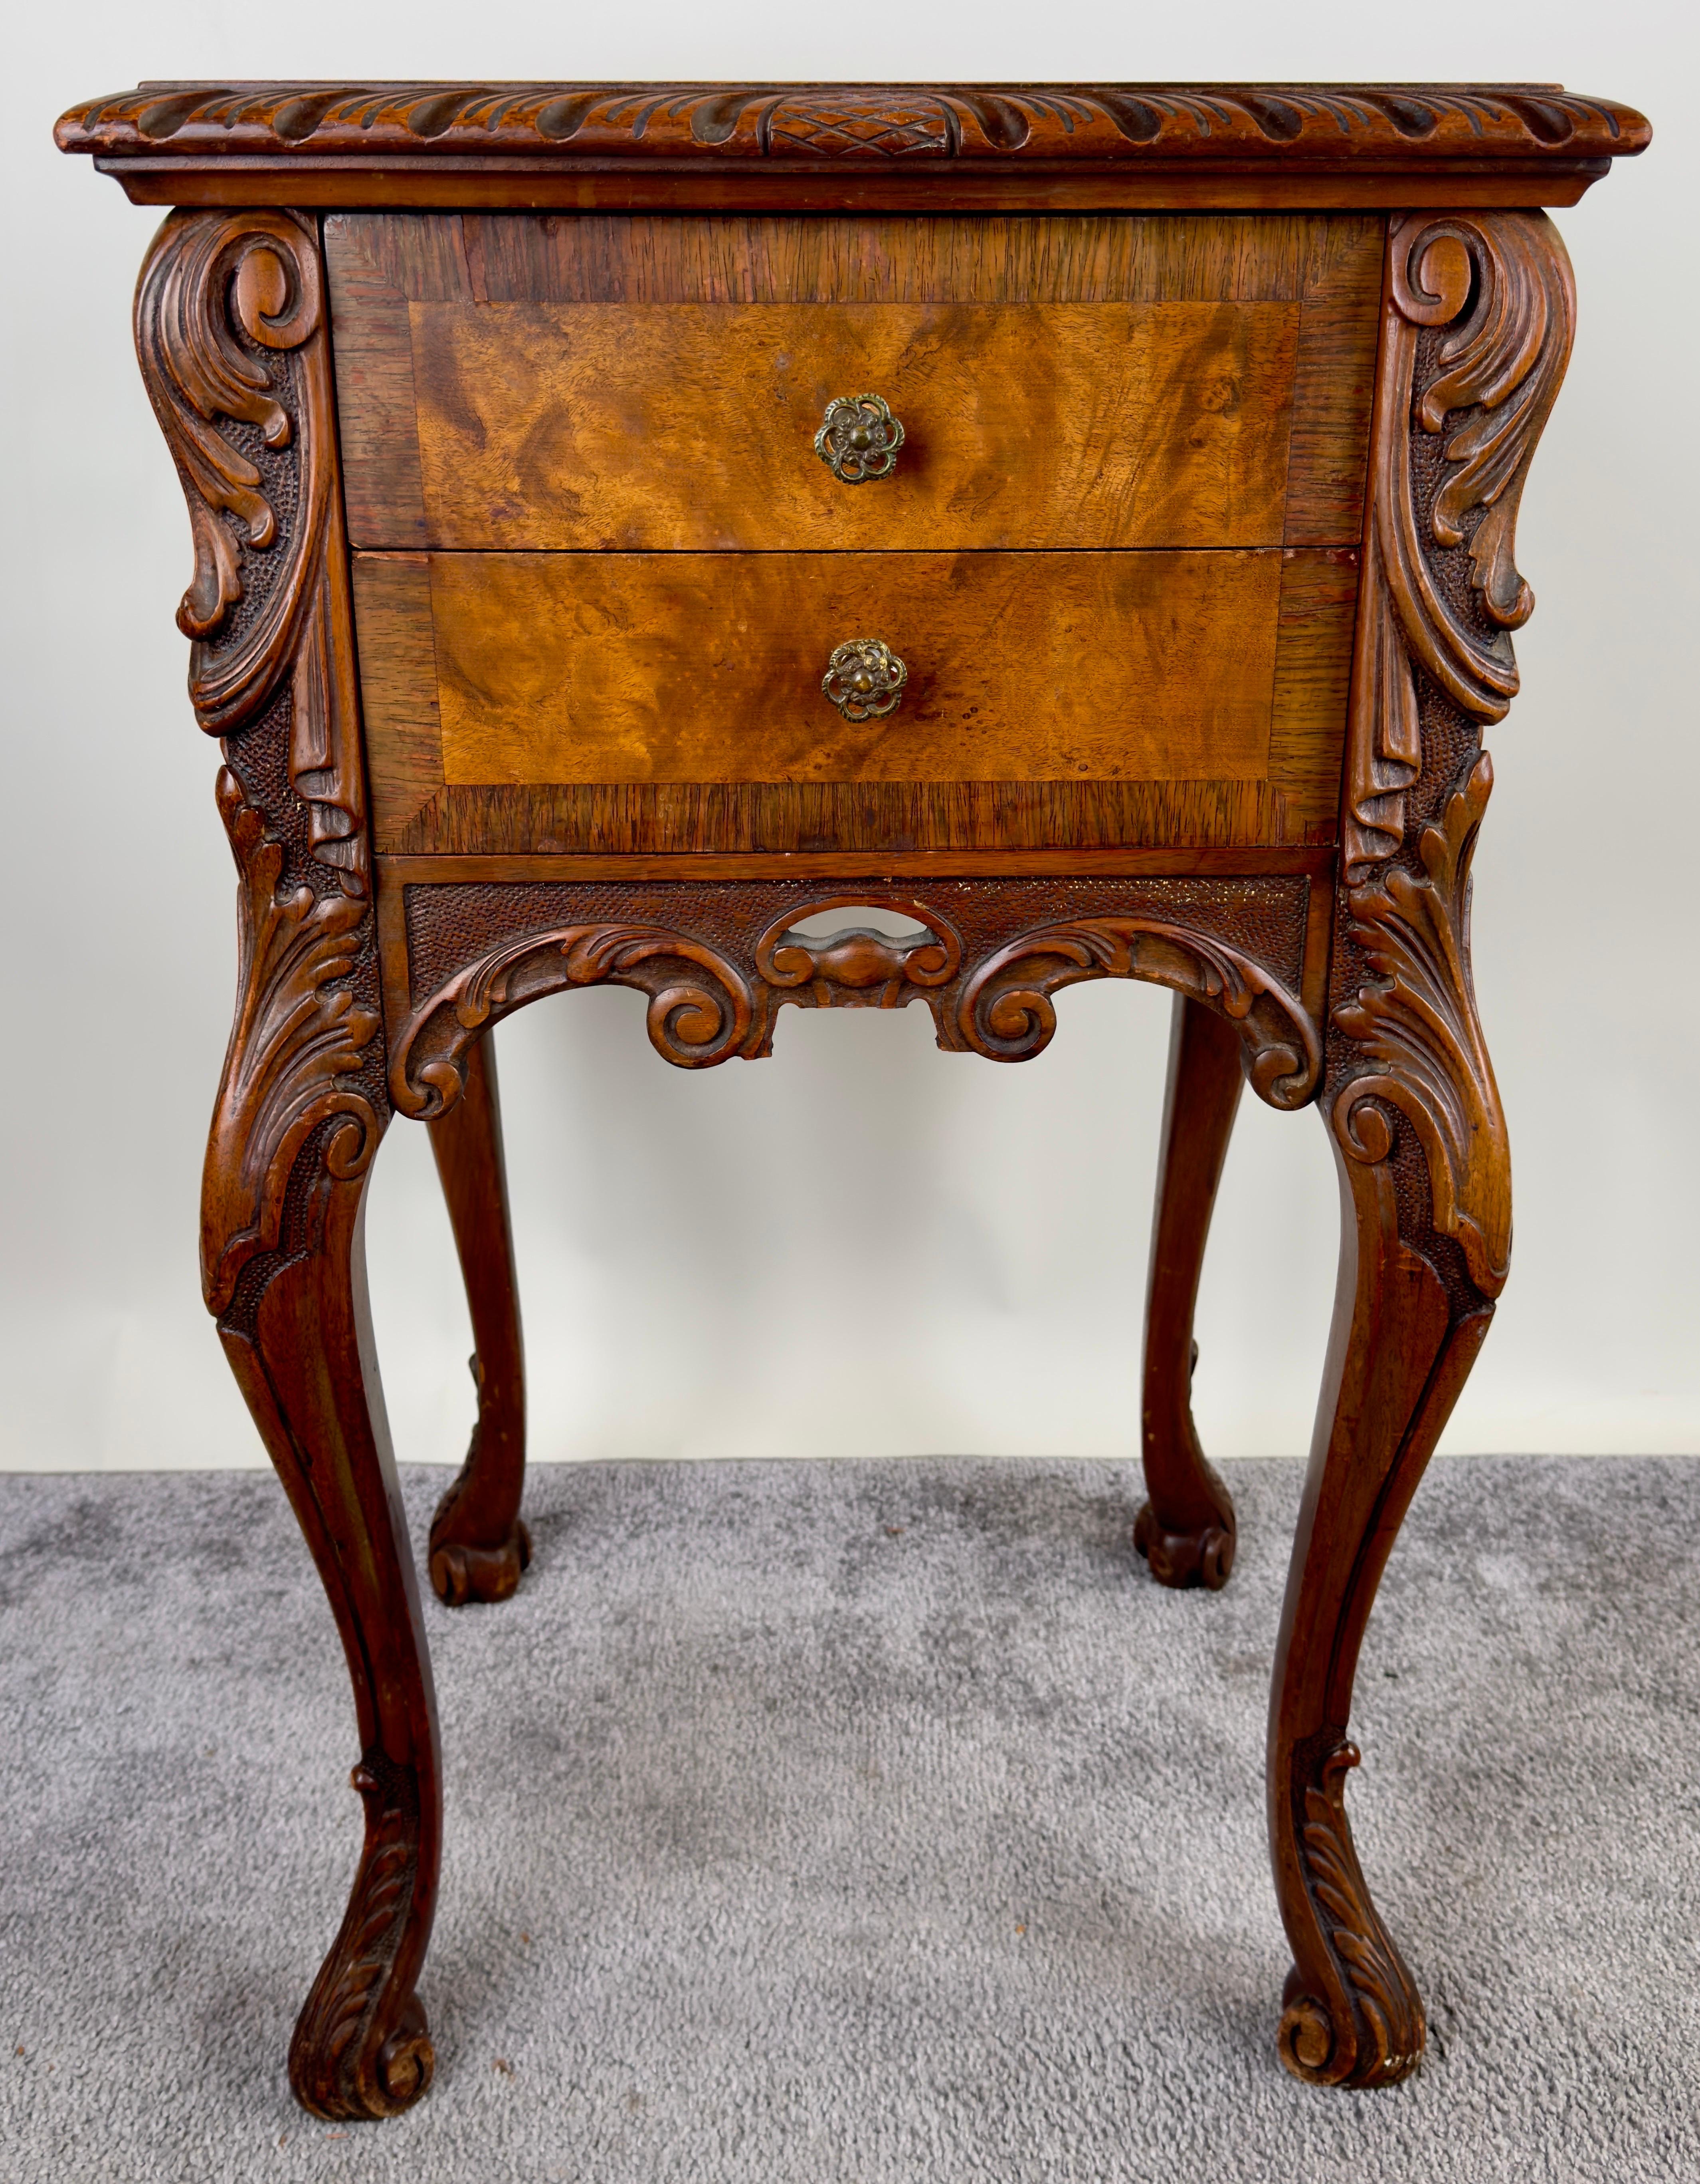 A 19th-century Burl Walnut nightstand or end table showing exquisite craftsmanship and made of quality burl walnut, a wood that has graced the most distinguished furniture throughout history.
The sturdy and well-made  table boasts a lavishly carved